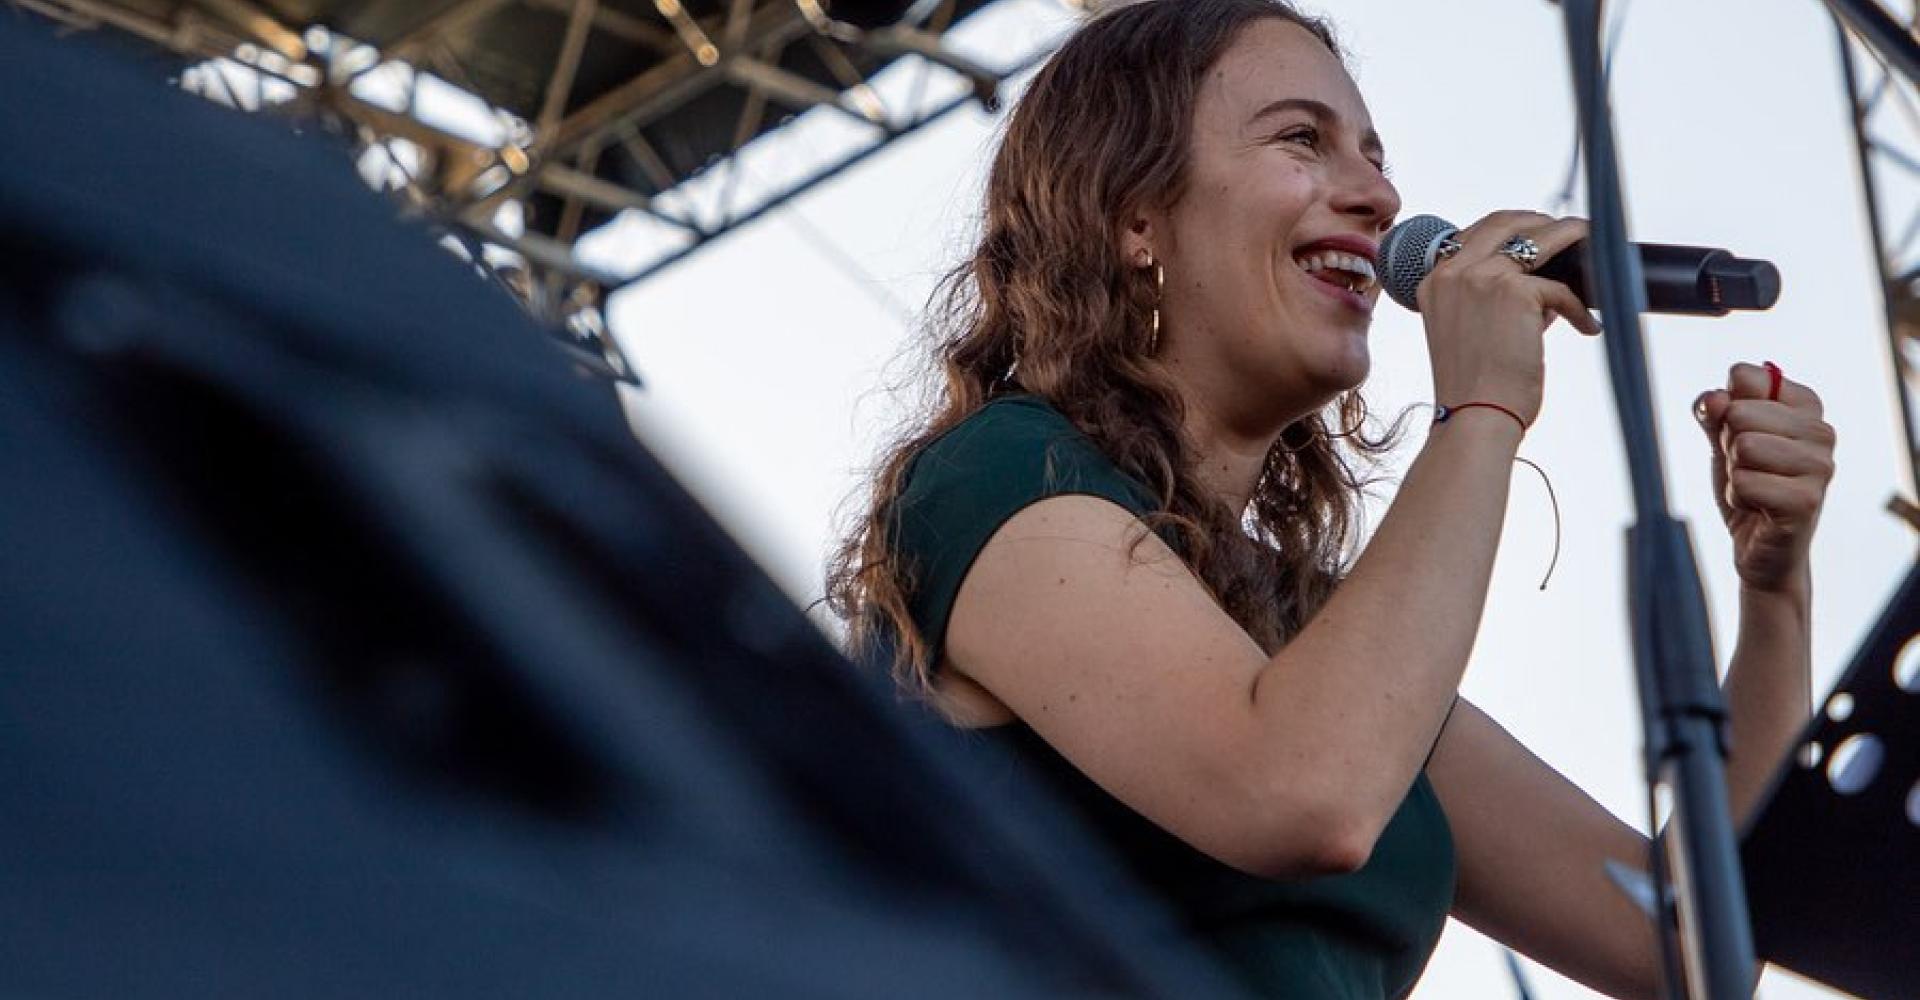 Delfina Cheb holds a microphone and smiles from the outdoor stage during the Panama Jazz Festival.